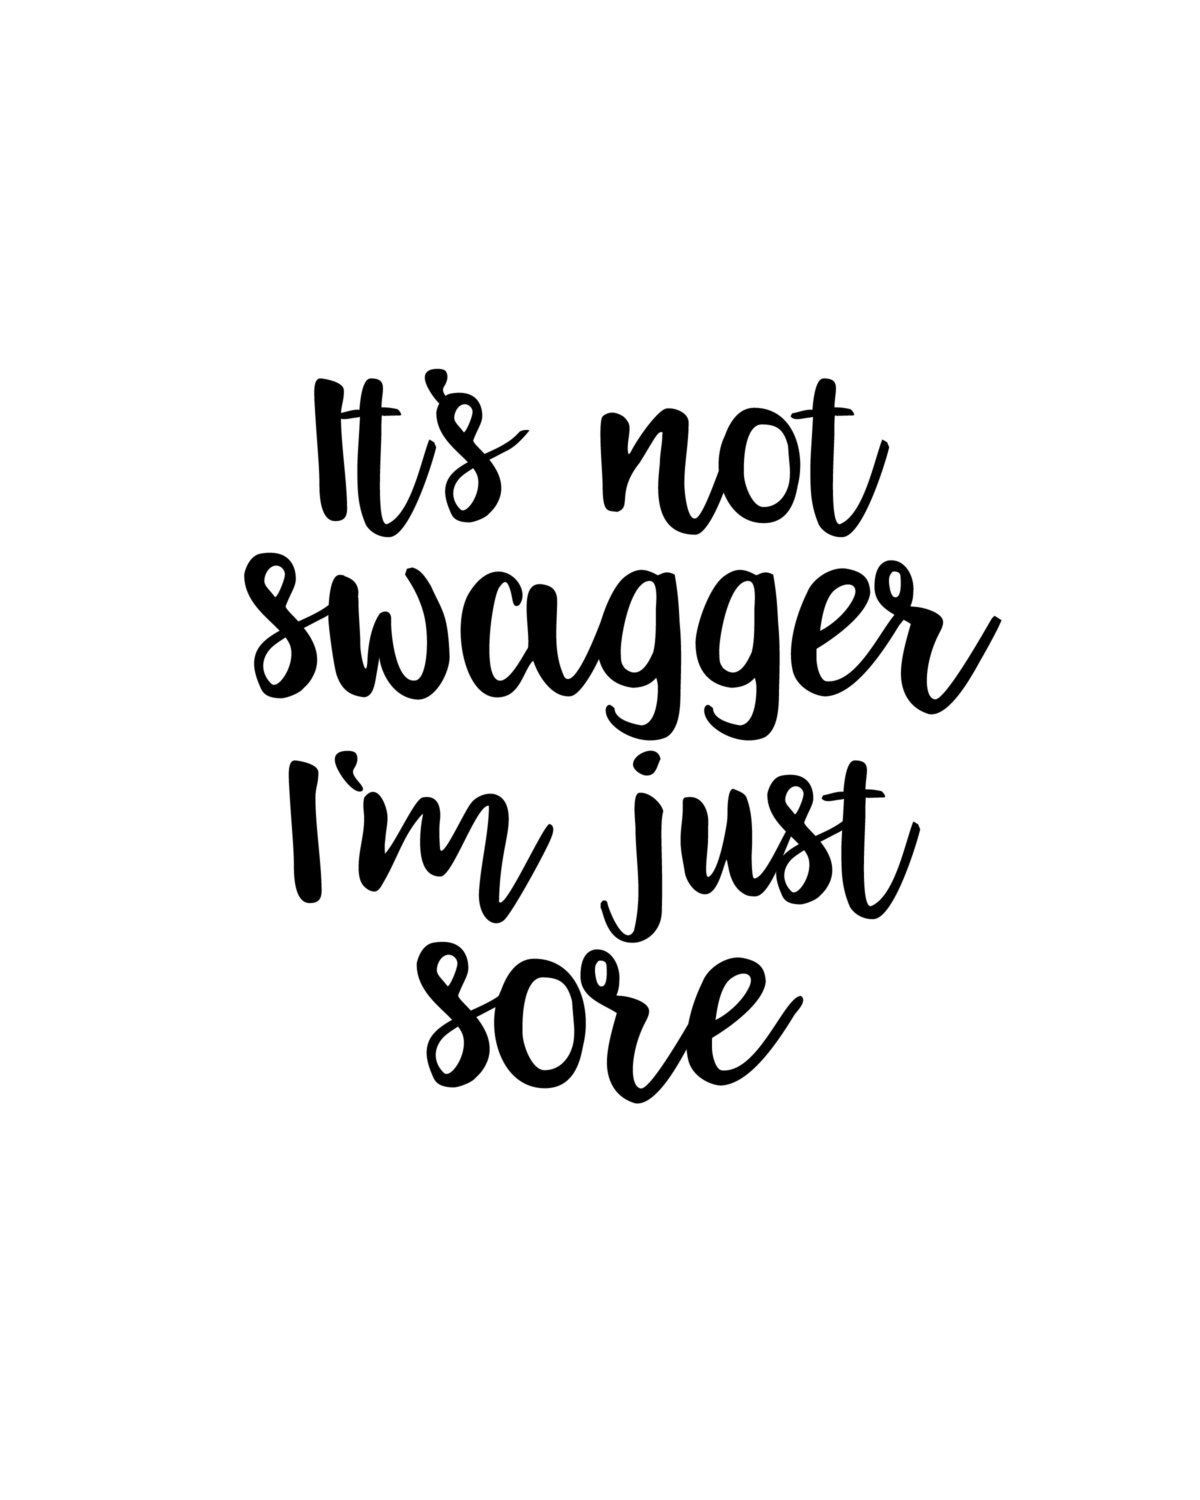 It's Not Swagger I'm Just Sore, Motivational Poster, Fitness Prints, Funny Fitness Quotes, Downloadable Prints, Inspirational Art, Gym Print - It's Not Swagger I'm Just Sore, Motivational Poster, Fitness Prints, Funny Fitness Quotes, Downloadable Prints, Inspirational Art, Gym Print -   7 tuesday fitness Humor ideas